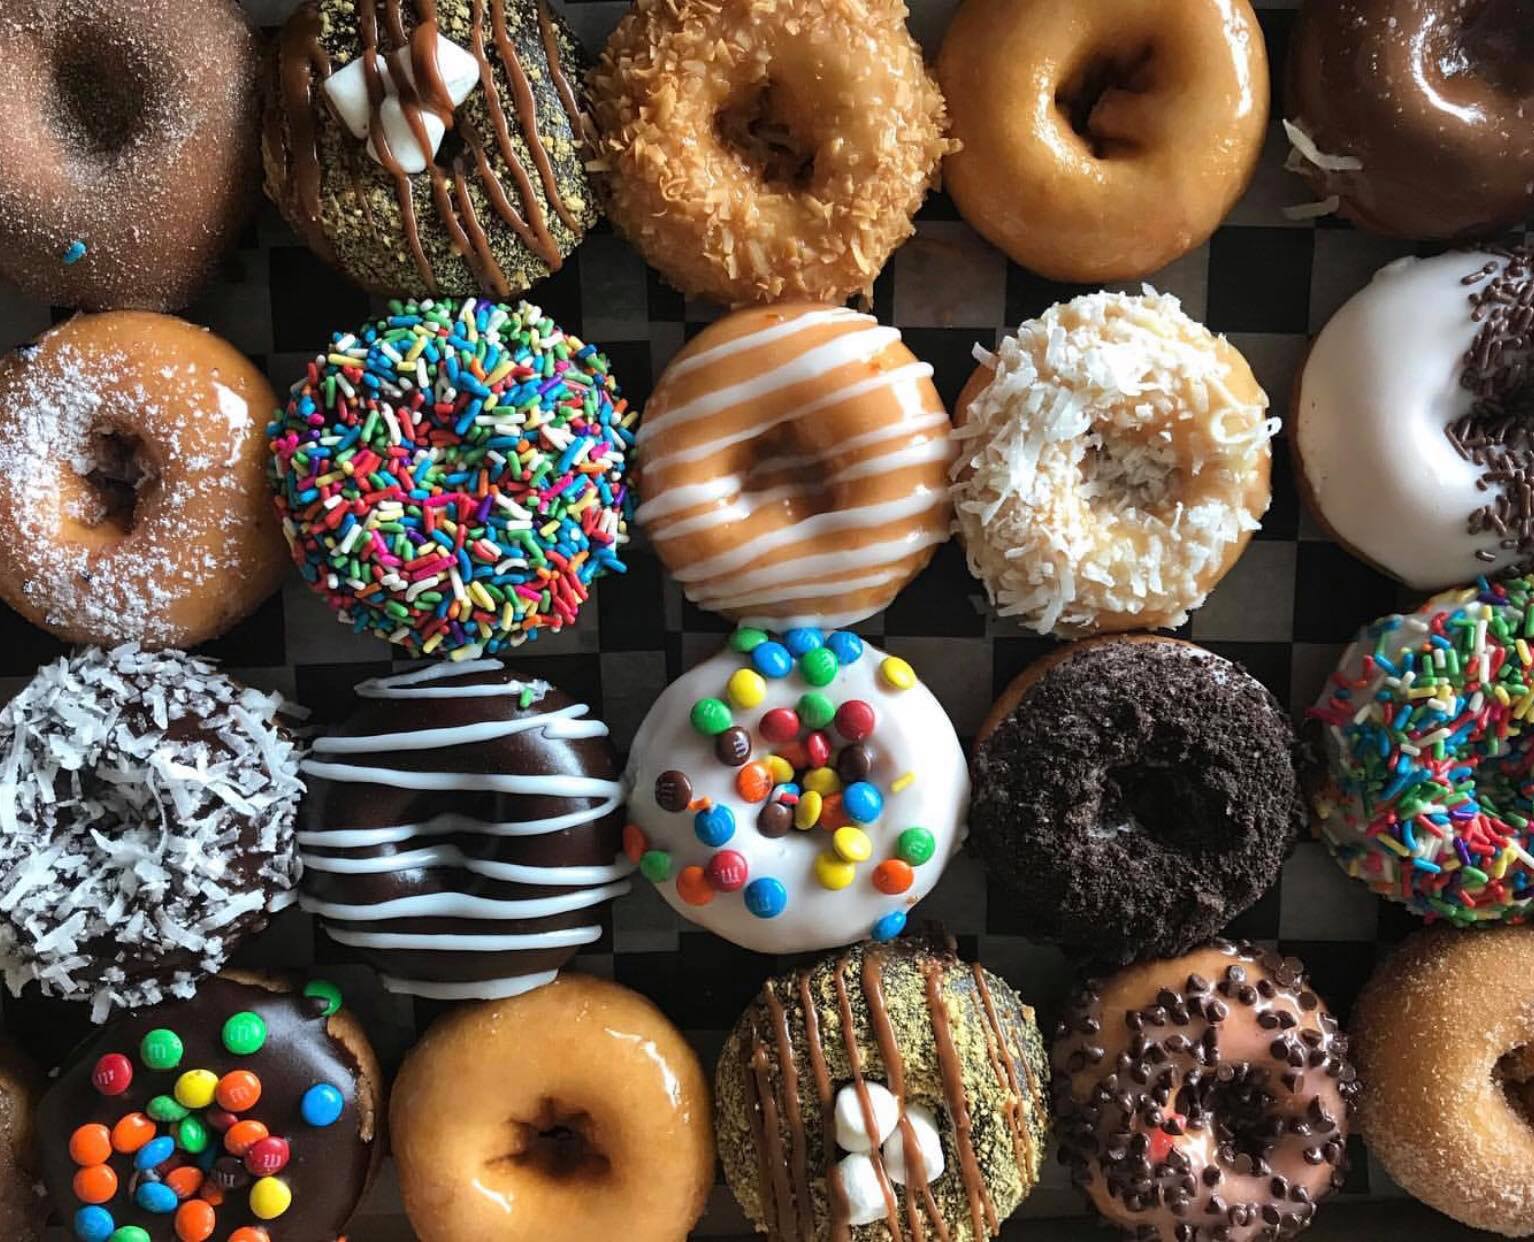 A large assortment of doughnuts including doughnuts topped with sprinkles, chocolate glaze, and coconut.